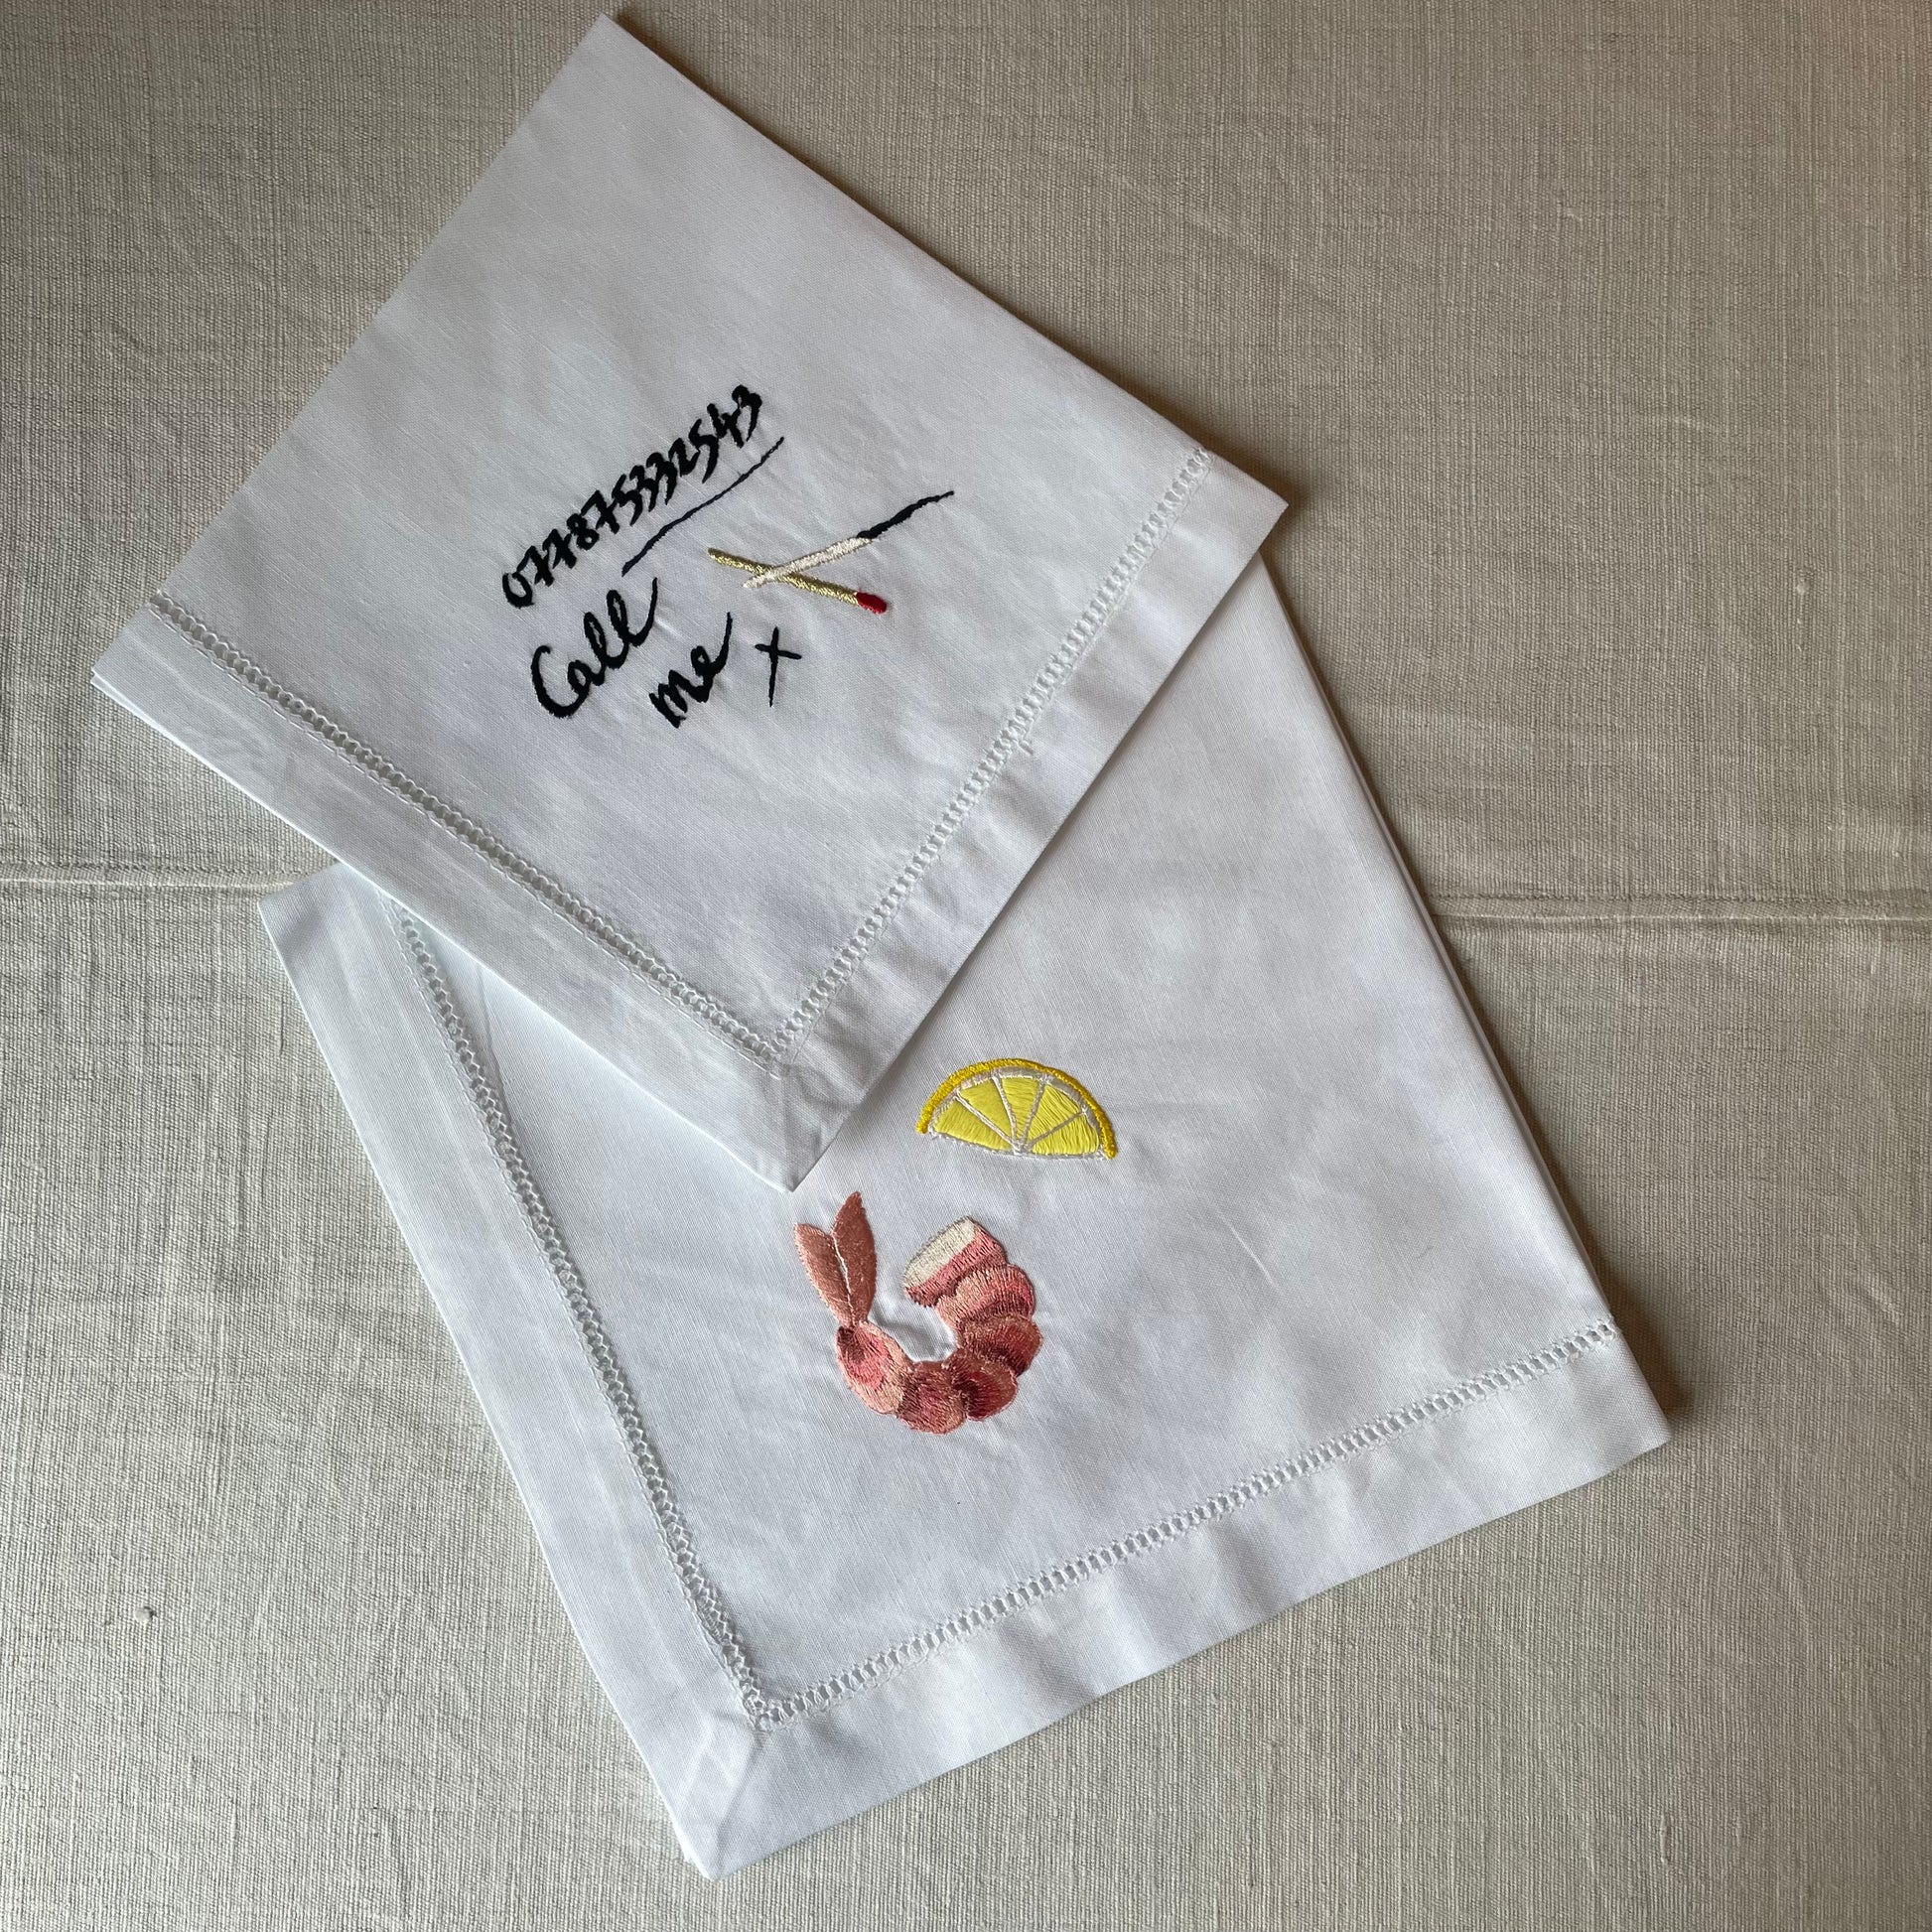 White napkin with the words 'call me', a collection of numbers and a two matchsticks embroidered on. Underneath is another white napkin with an embroidered prawn and lemon on